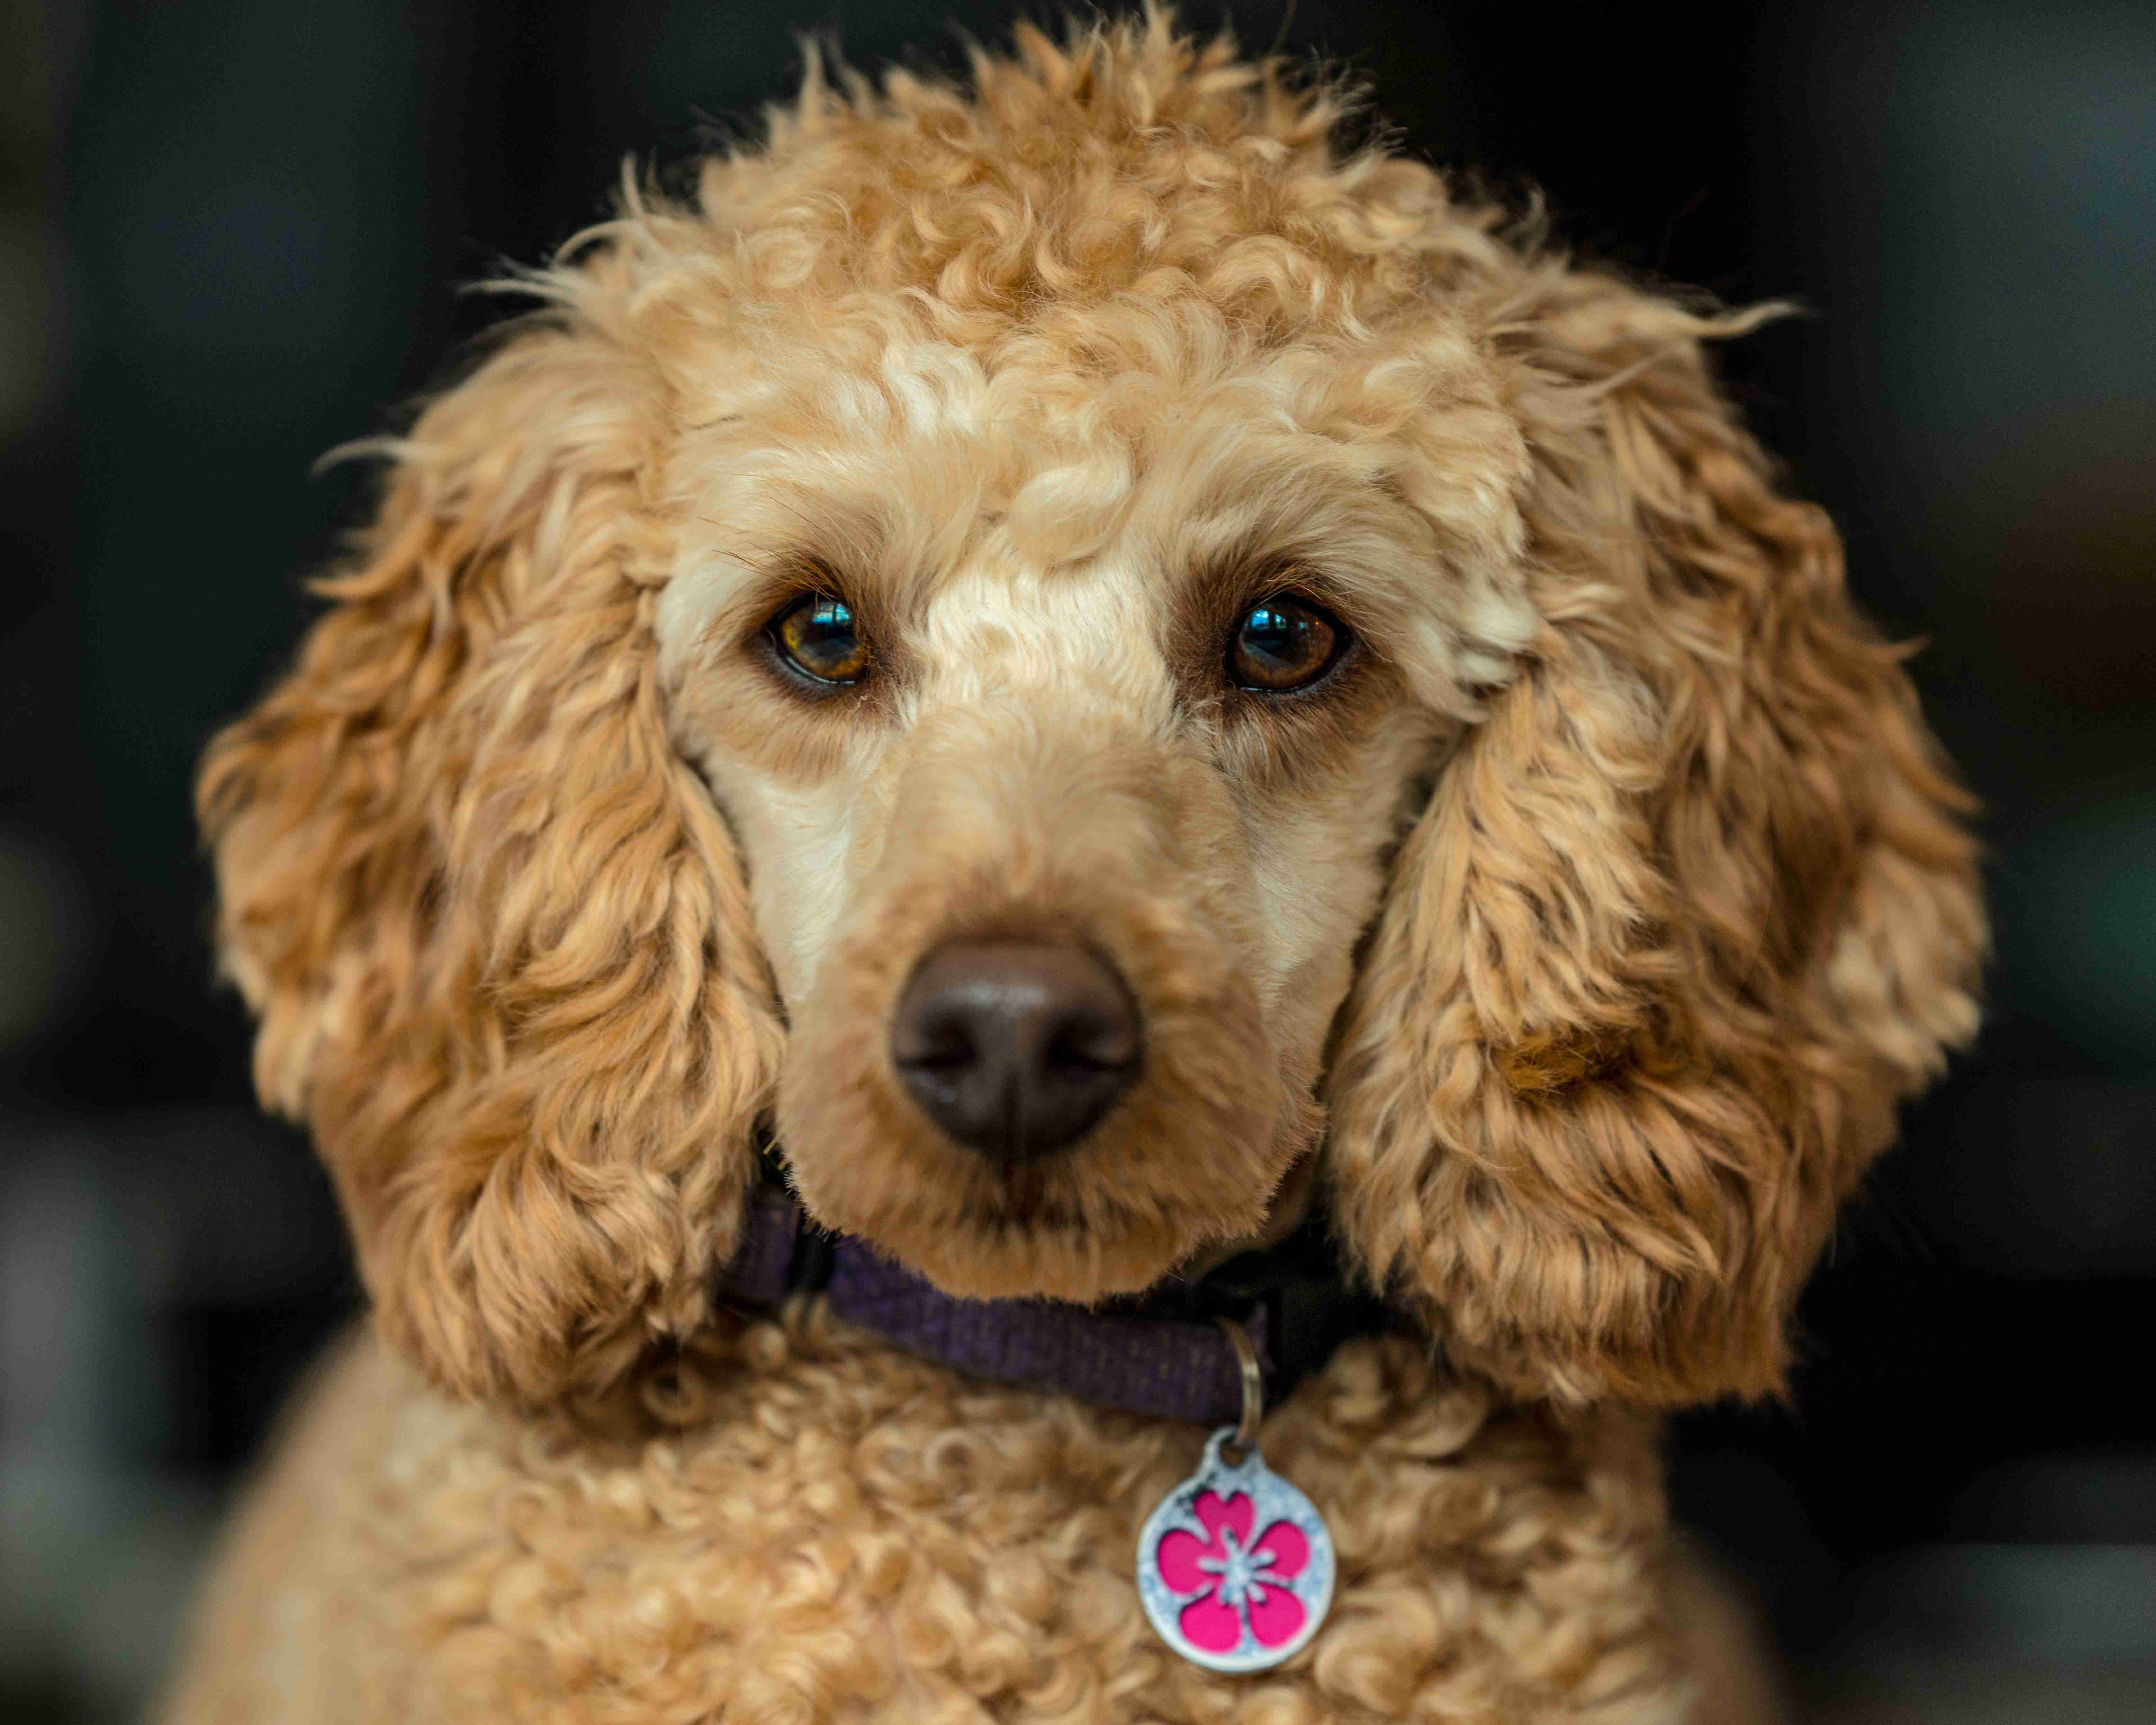 Are Poodles at risk for heart conditions?